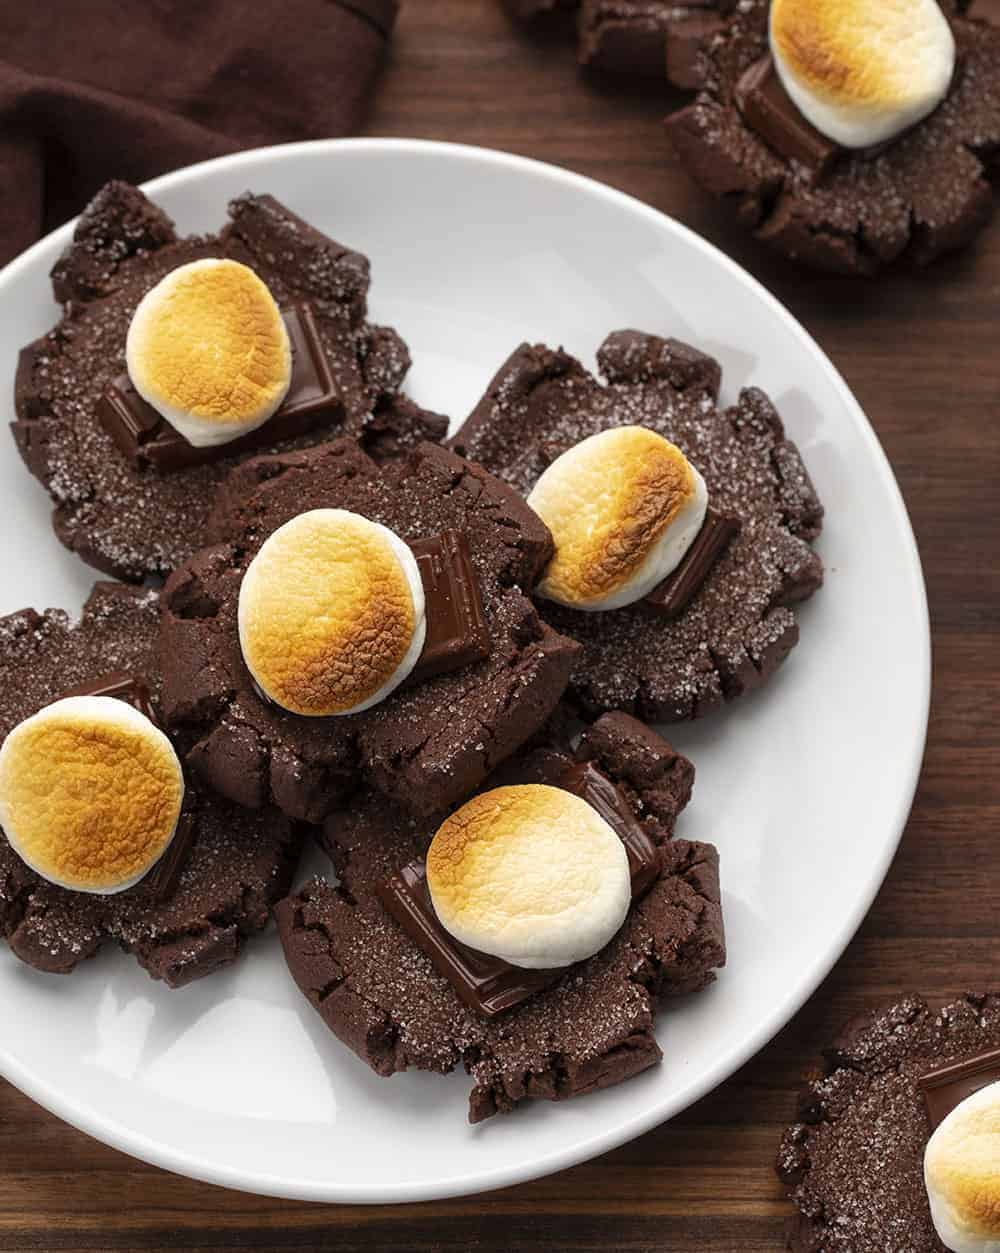 Plate of Chocolate Marshmallow Cookies from Overhead